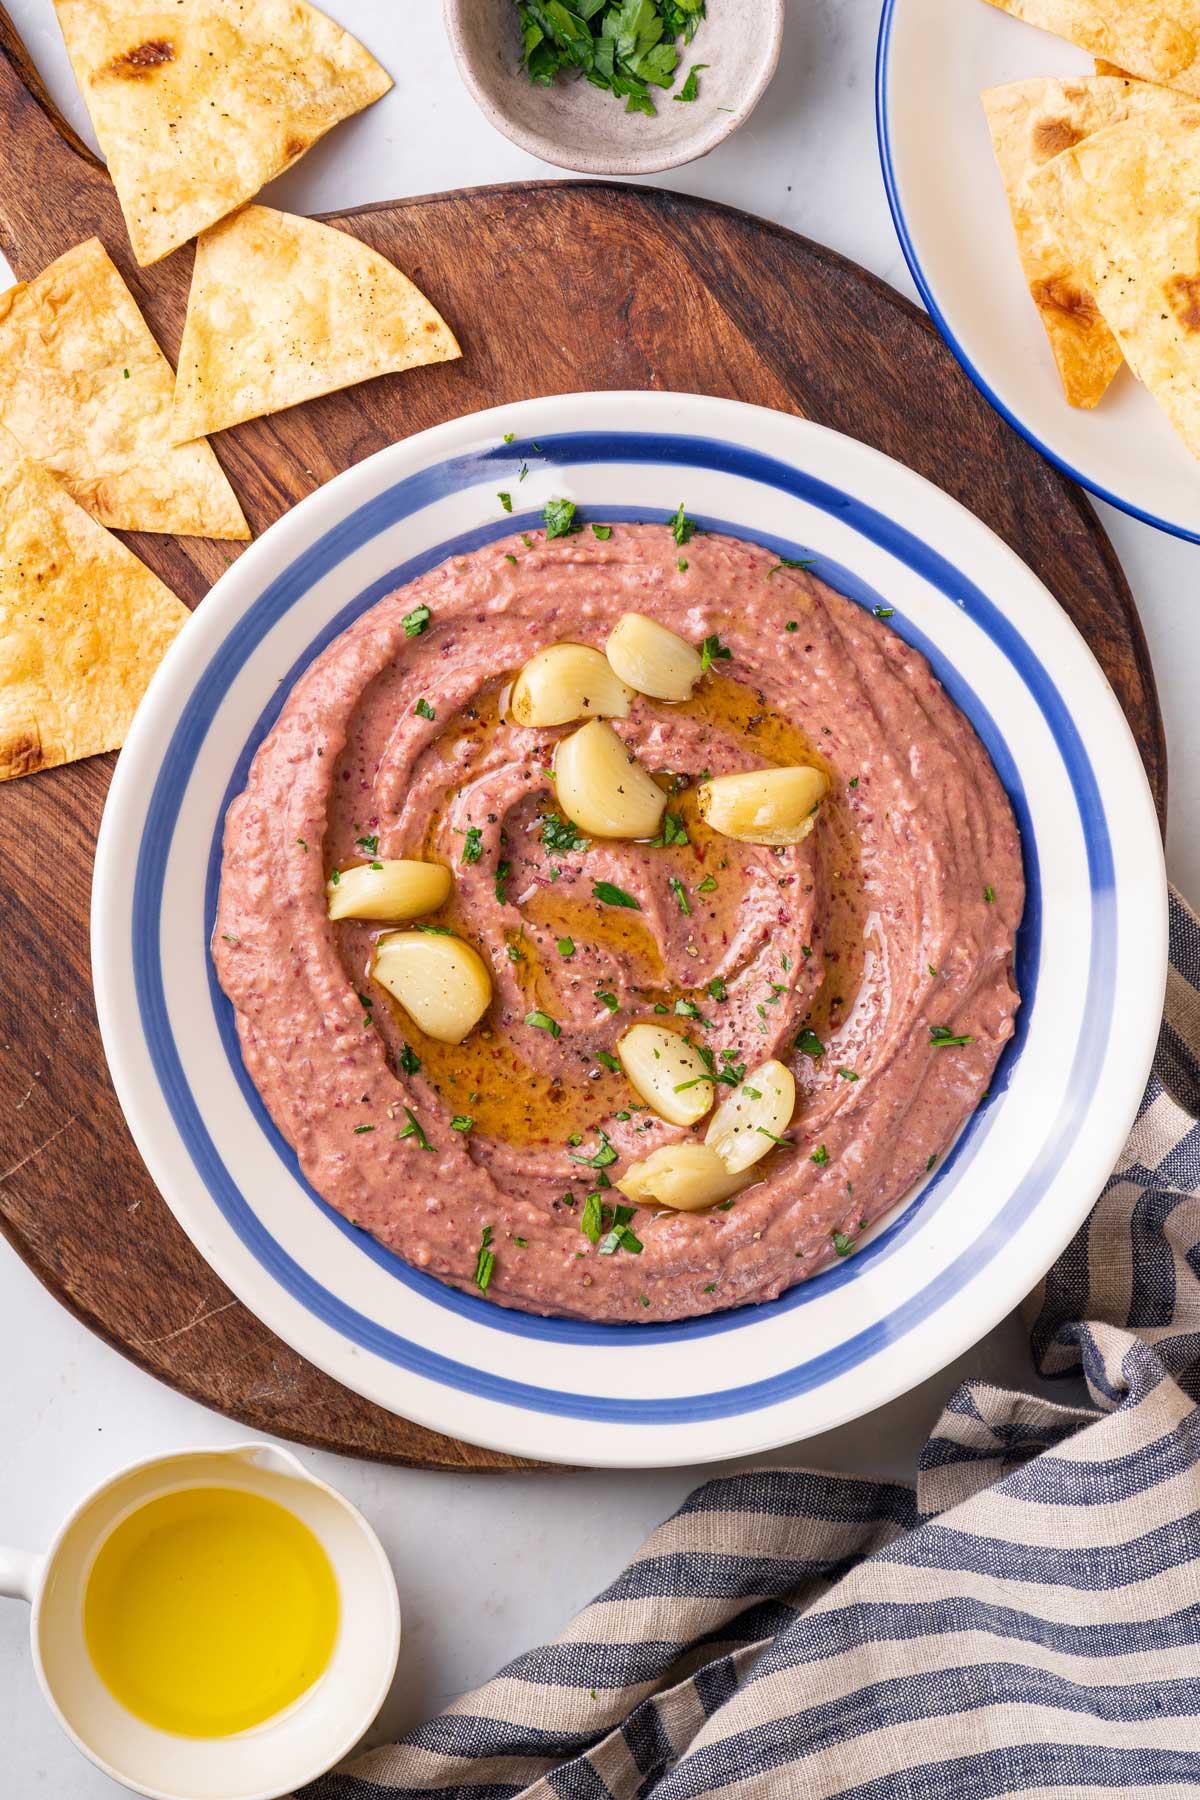 Bowl with red bean hummus with roasted garlic